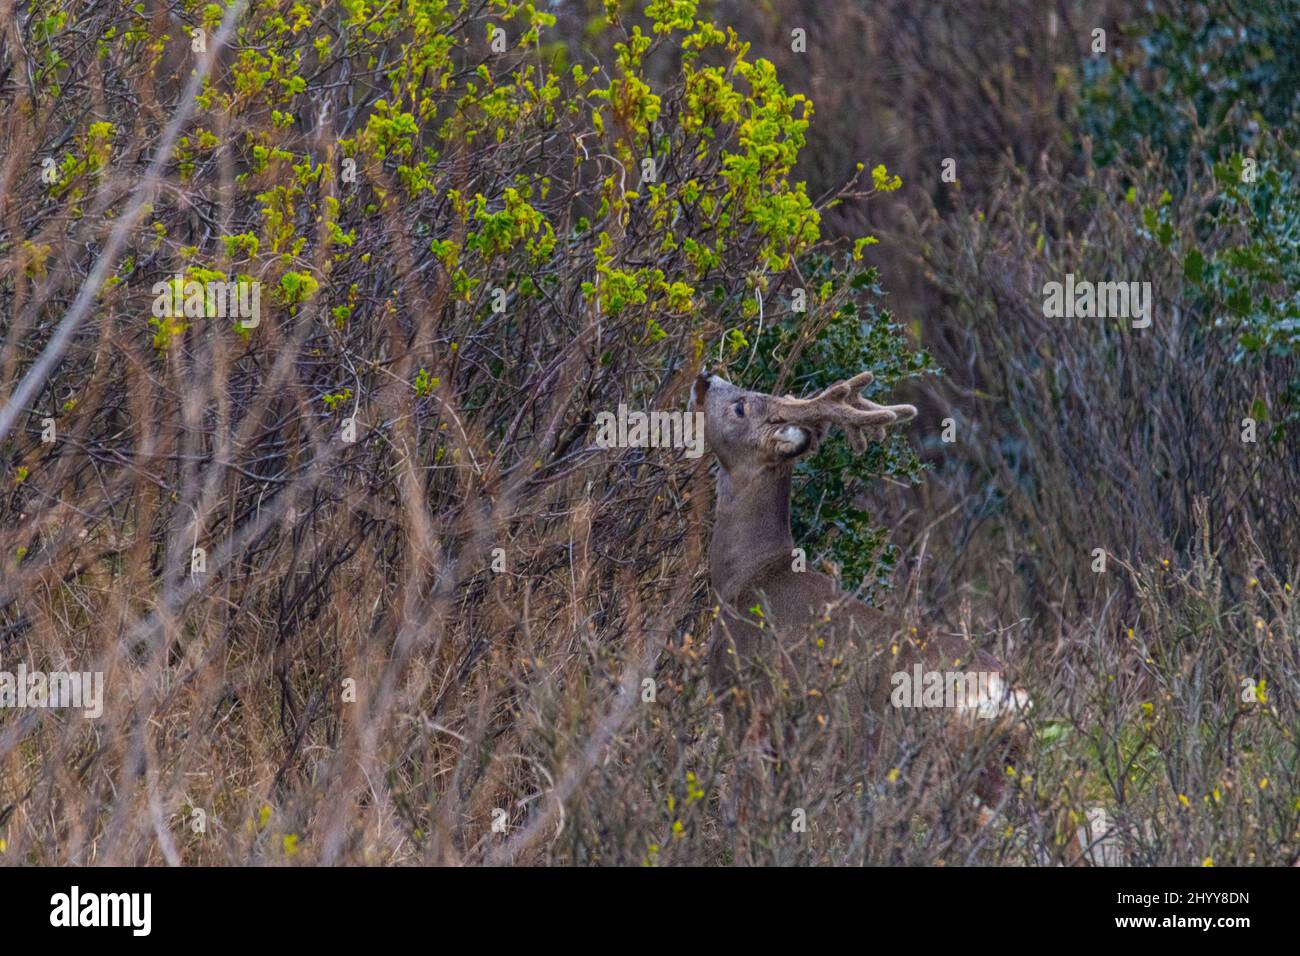 Deer  looking for food in the undergrowth on the island of Juist Stock Photo